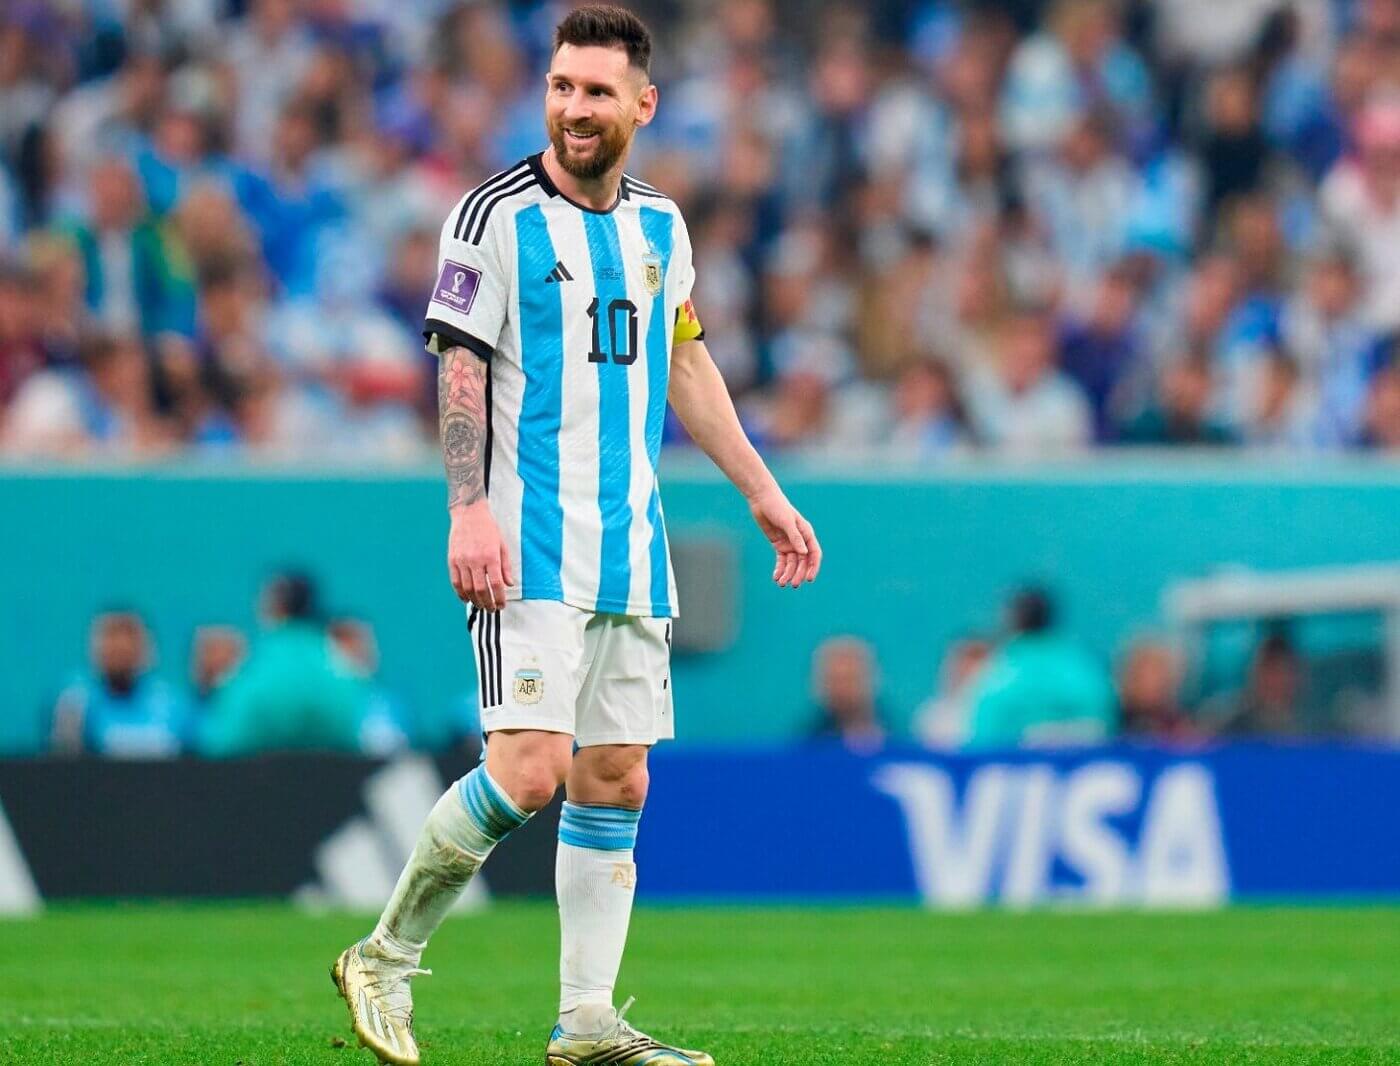 THE BEST 10 LIONEL MESSI WALLPAPER HD ARGENTINA PHOTOS IN 2022